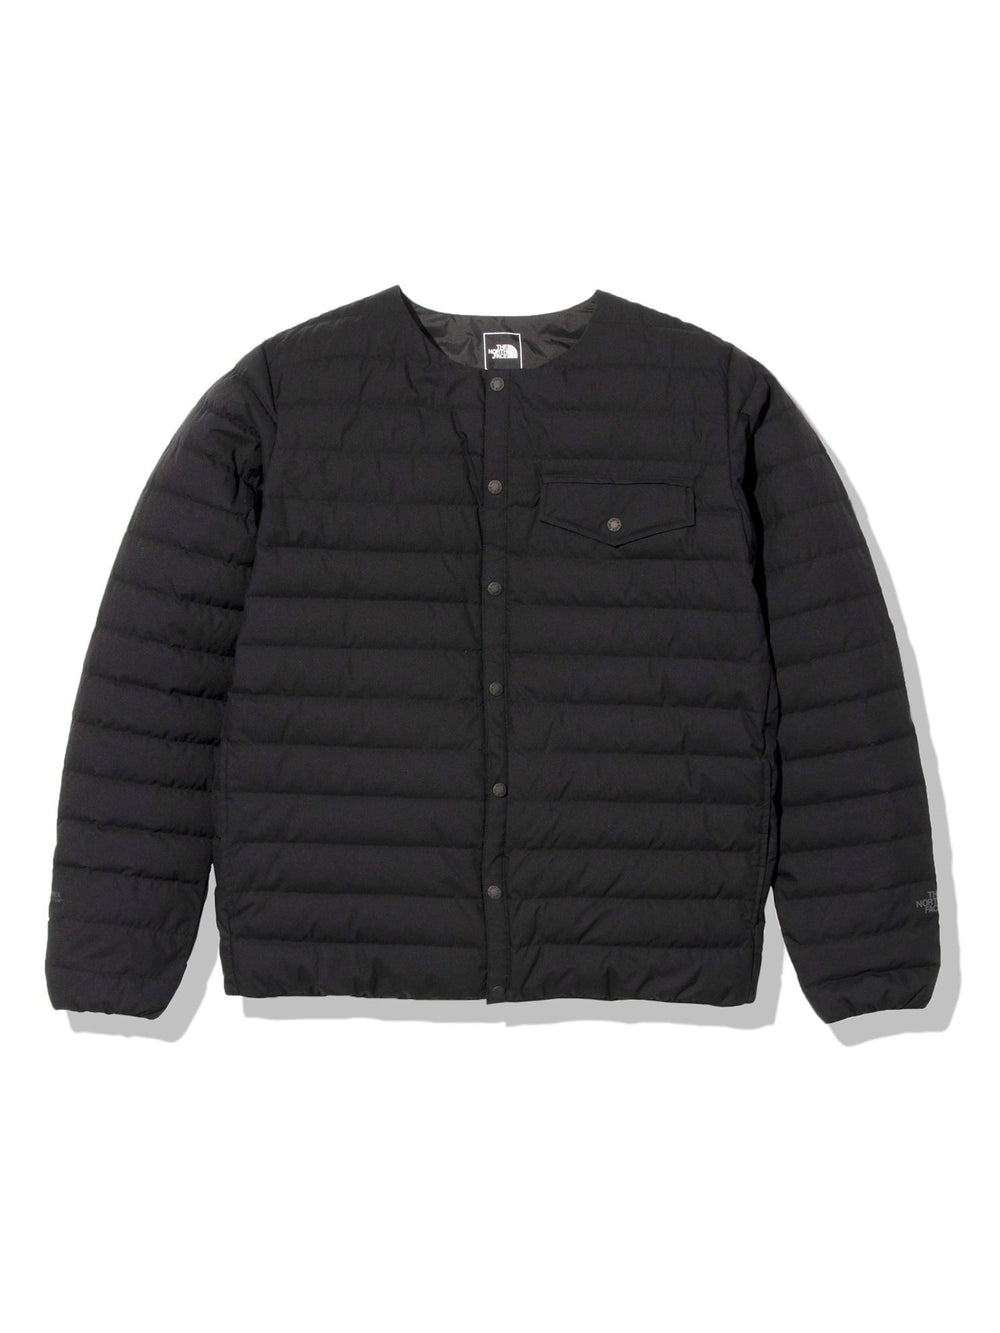 [THE NORTH FACE] Windstopper Zephyr Shell Cardigan / The